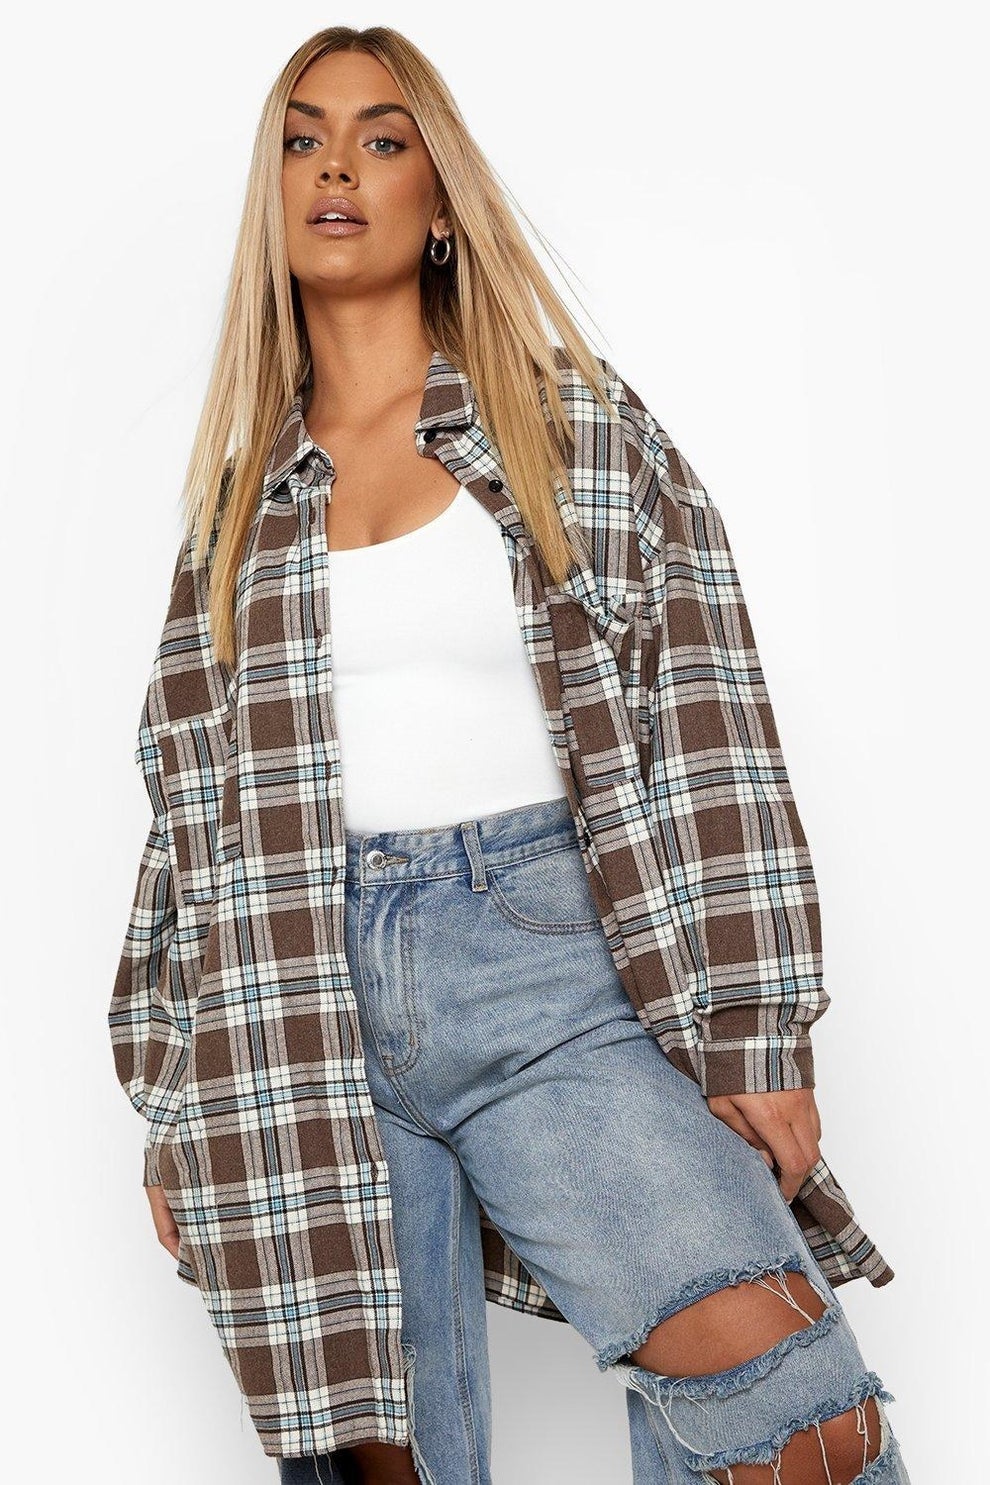 34 Pieces Of Clothing You Should Check Out Right Now